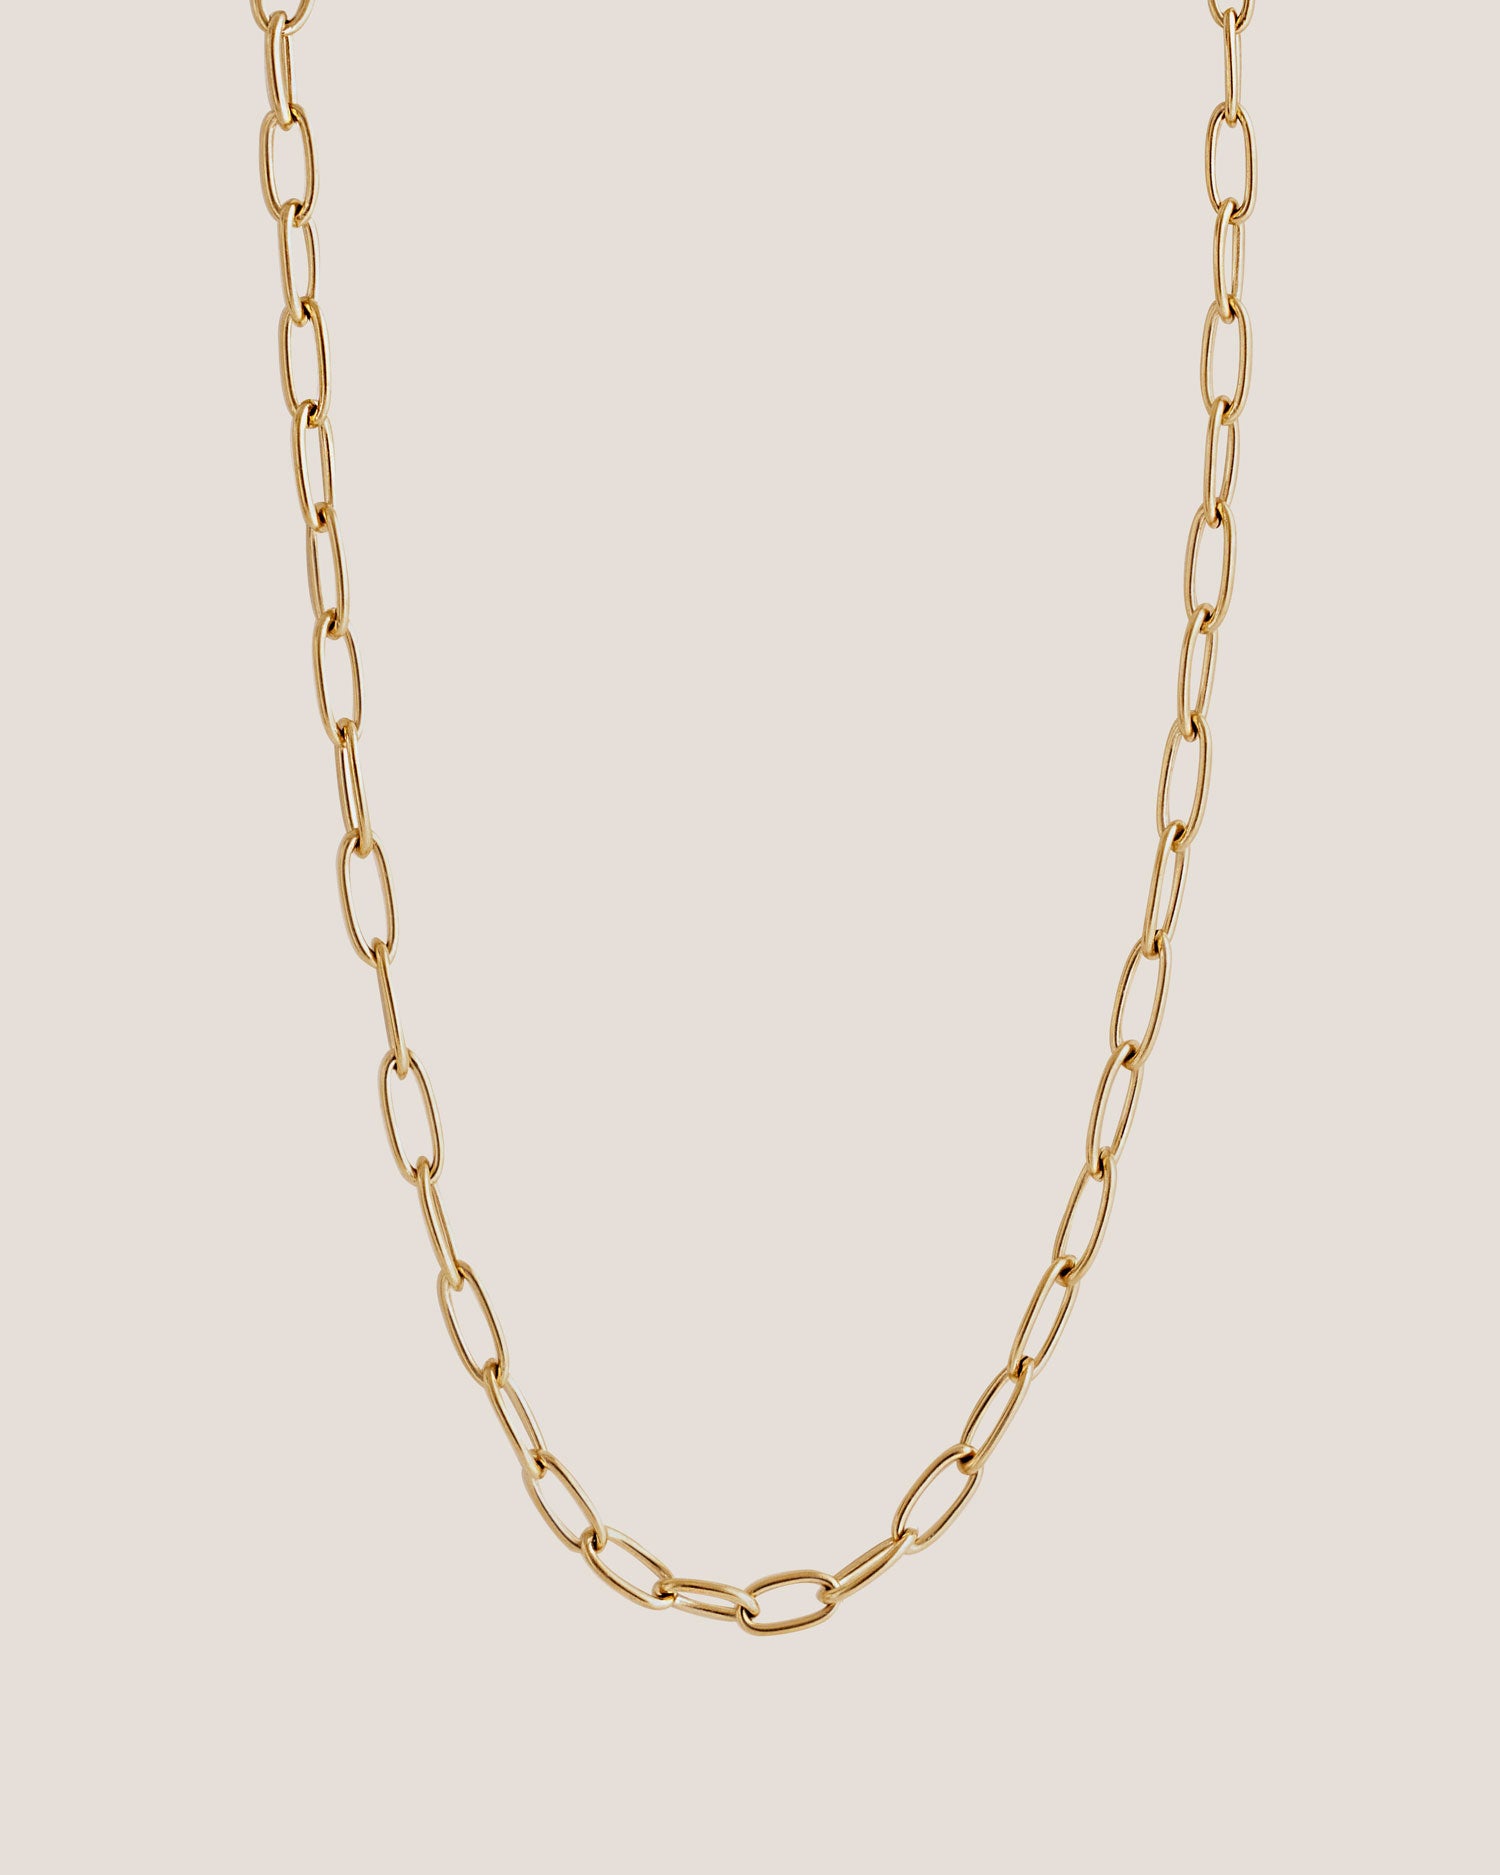 Oval Link Chain Gold Necklace